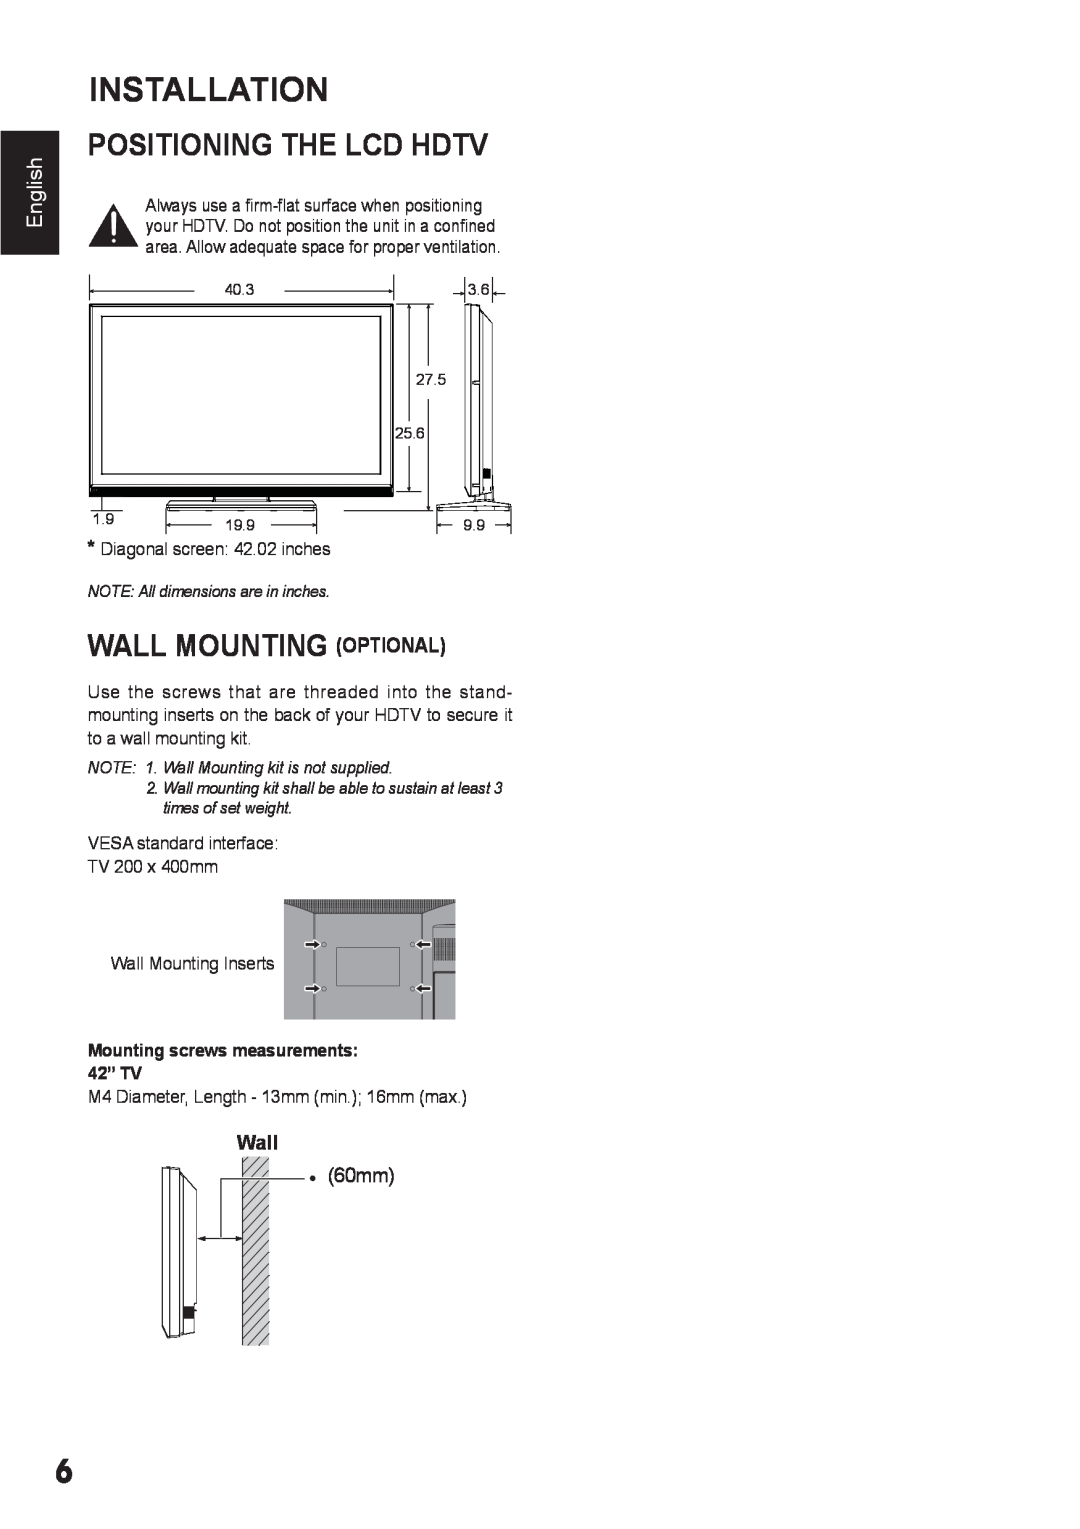 Sanyo DP42410 Installation, Positioning The Lcd Hdtv, Wall Mounting Optional, English, NOTE All dimensions are in inches 